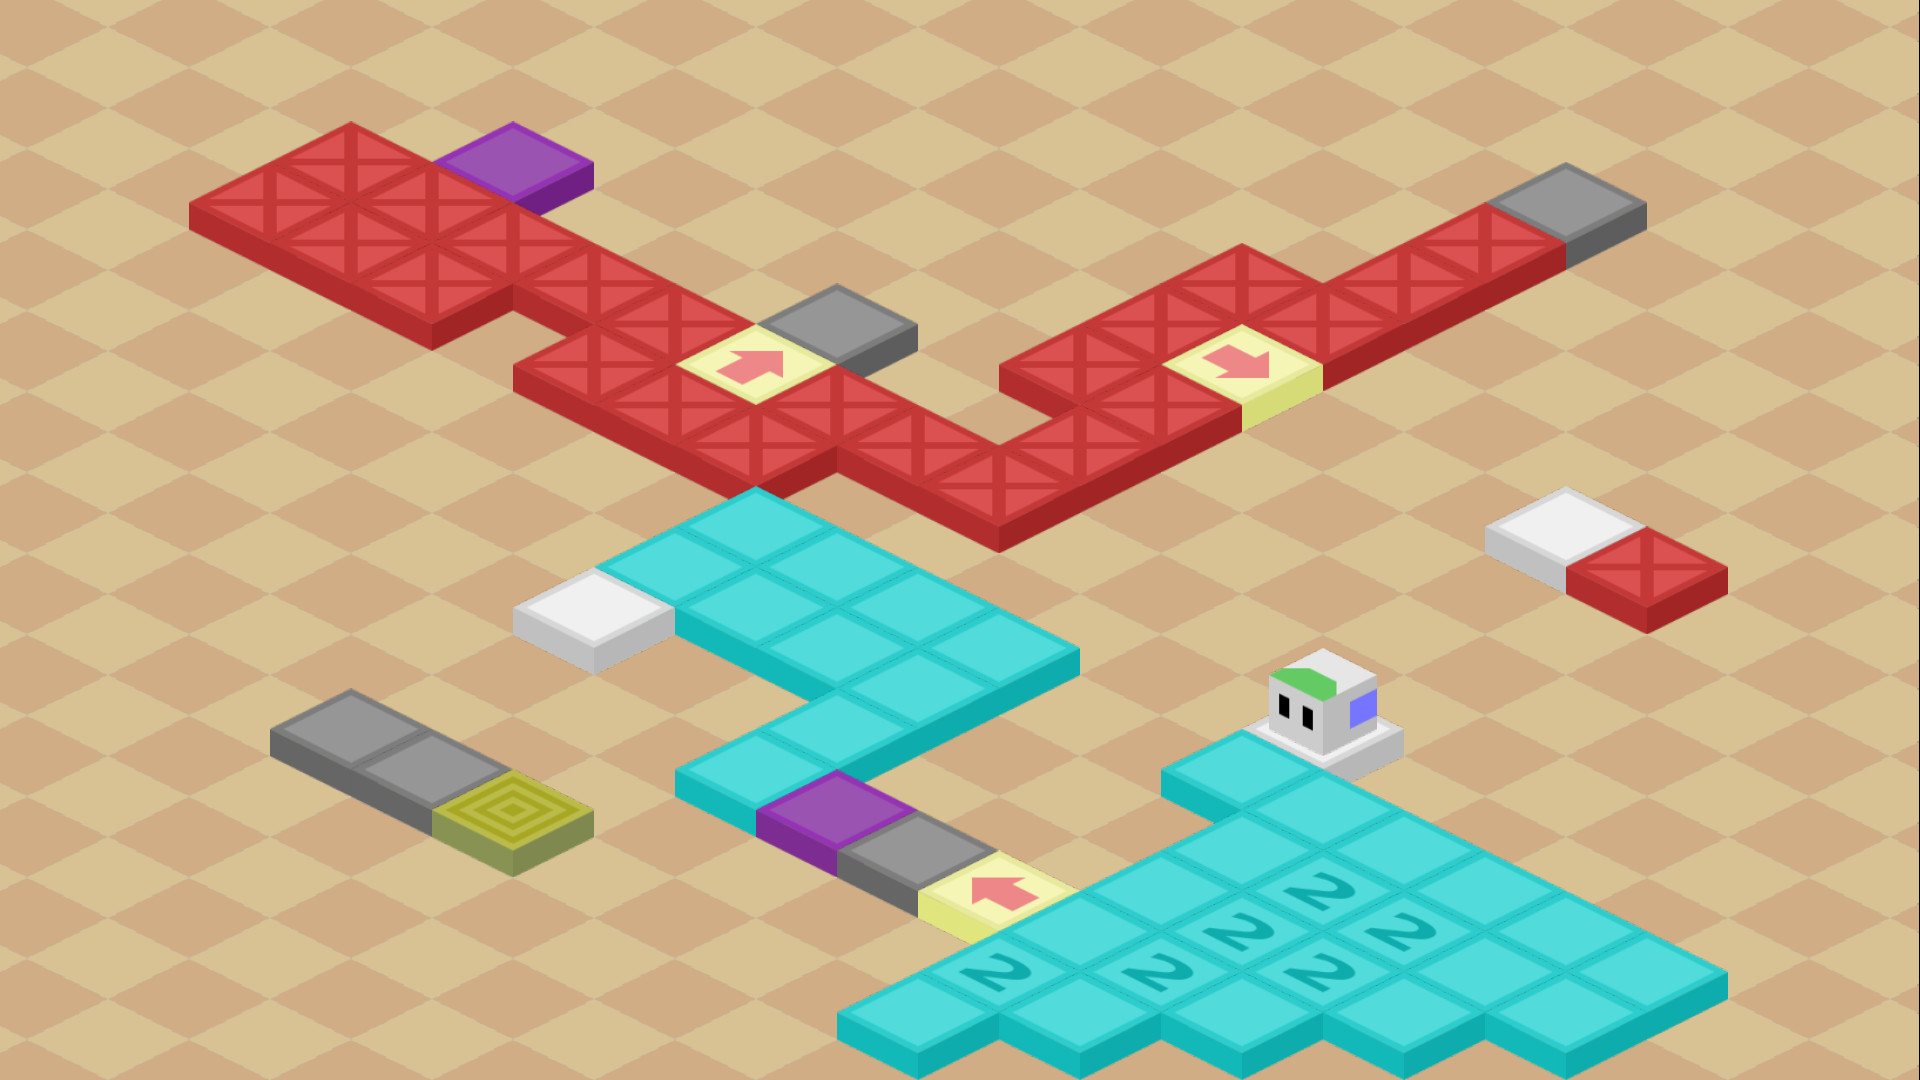 ISOTILES - Play Online for Free!